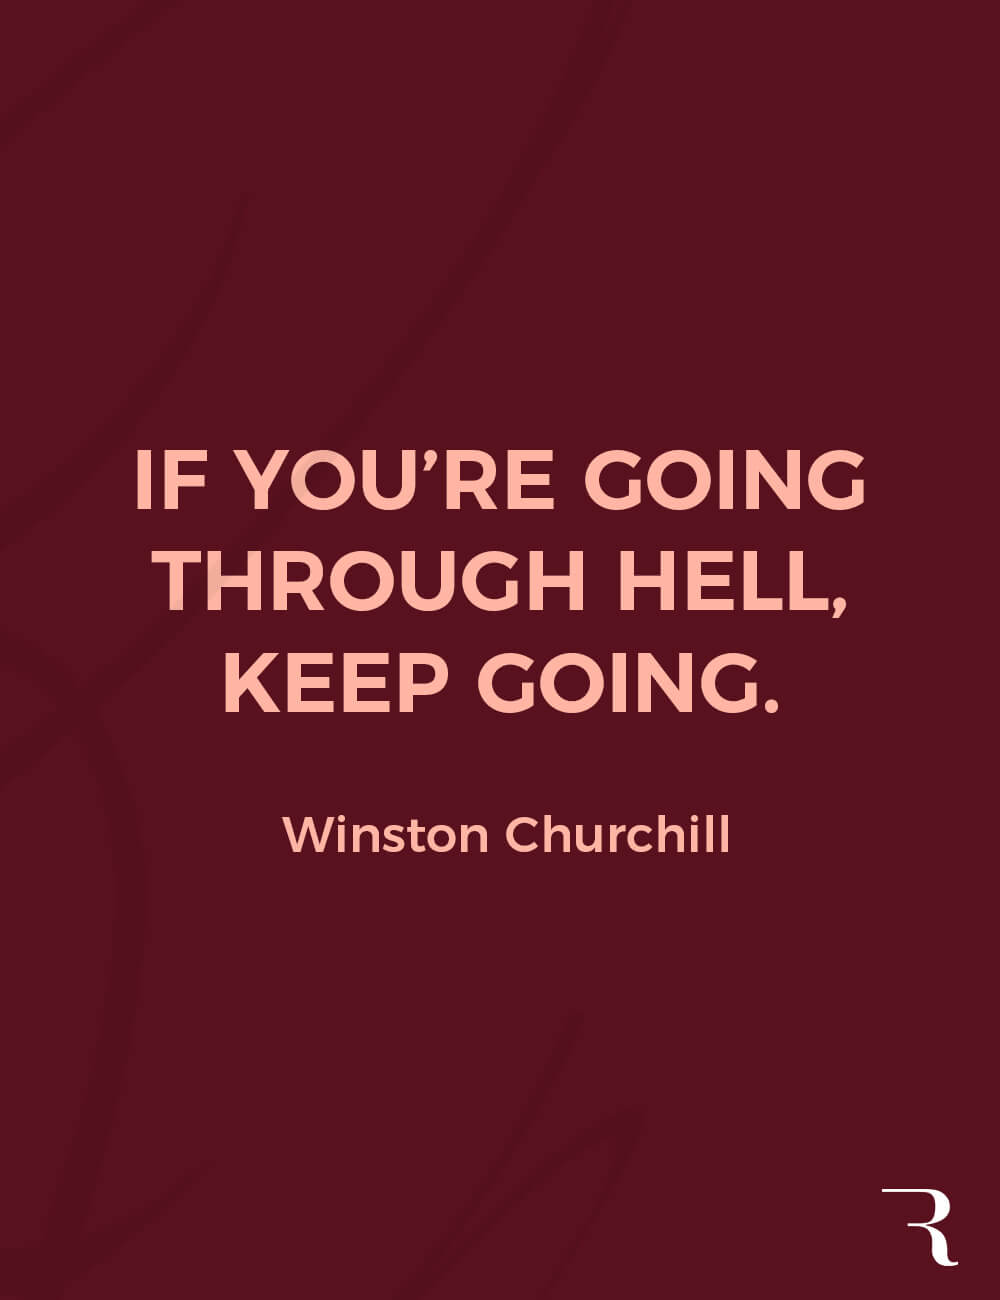 Motivational Quotes: "If you're going through hell, keep going." 112 Motivational Quotes to Be a Better Entrepreneur